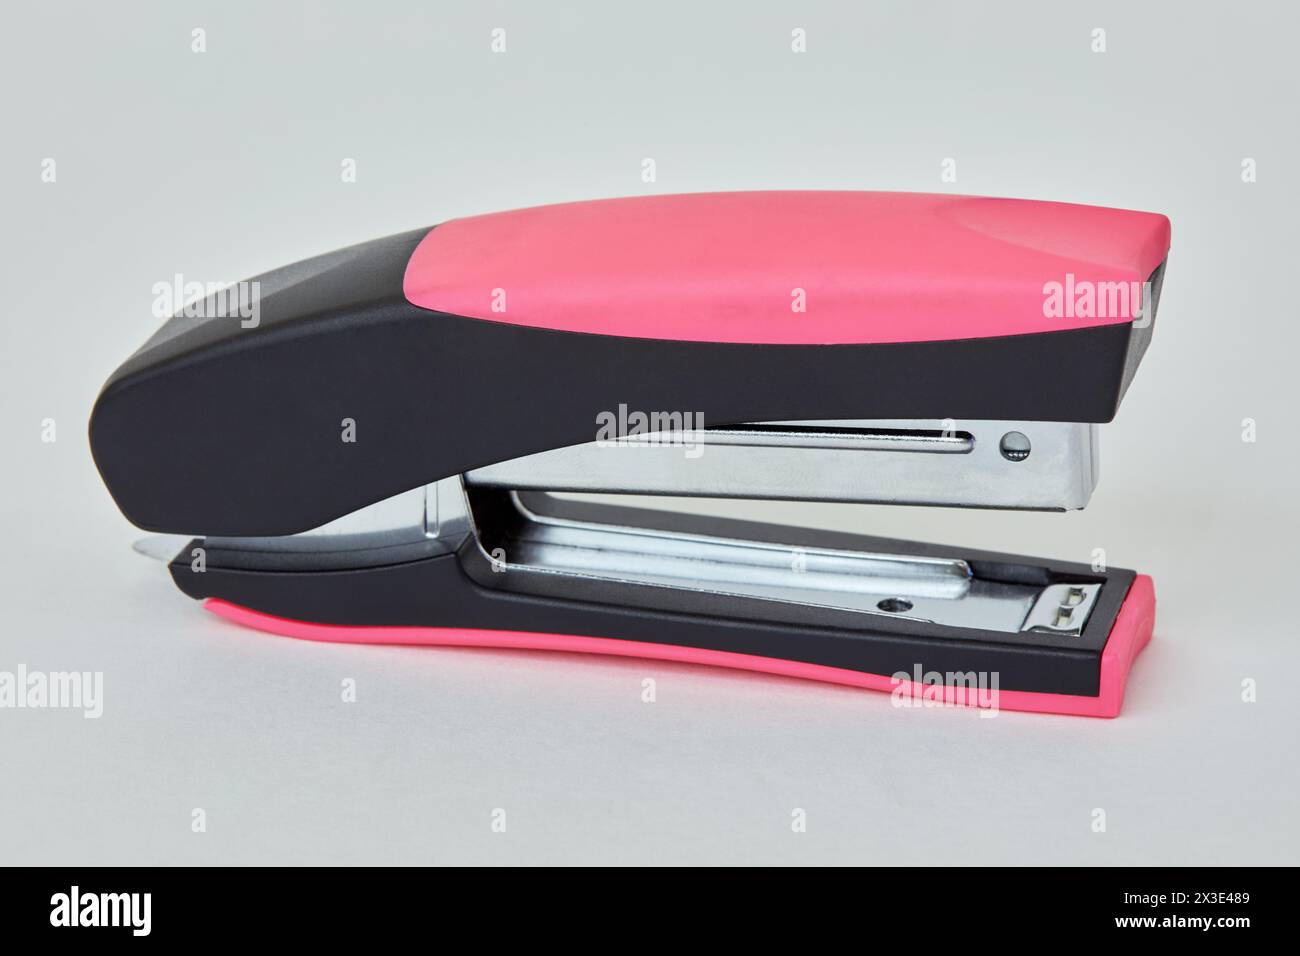 Black and pink stapler on white background. Stock Photo